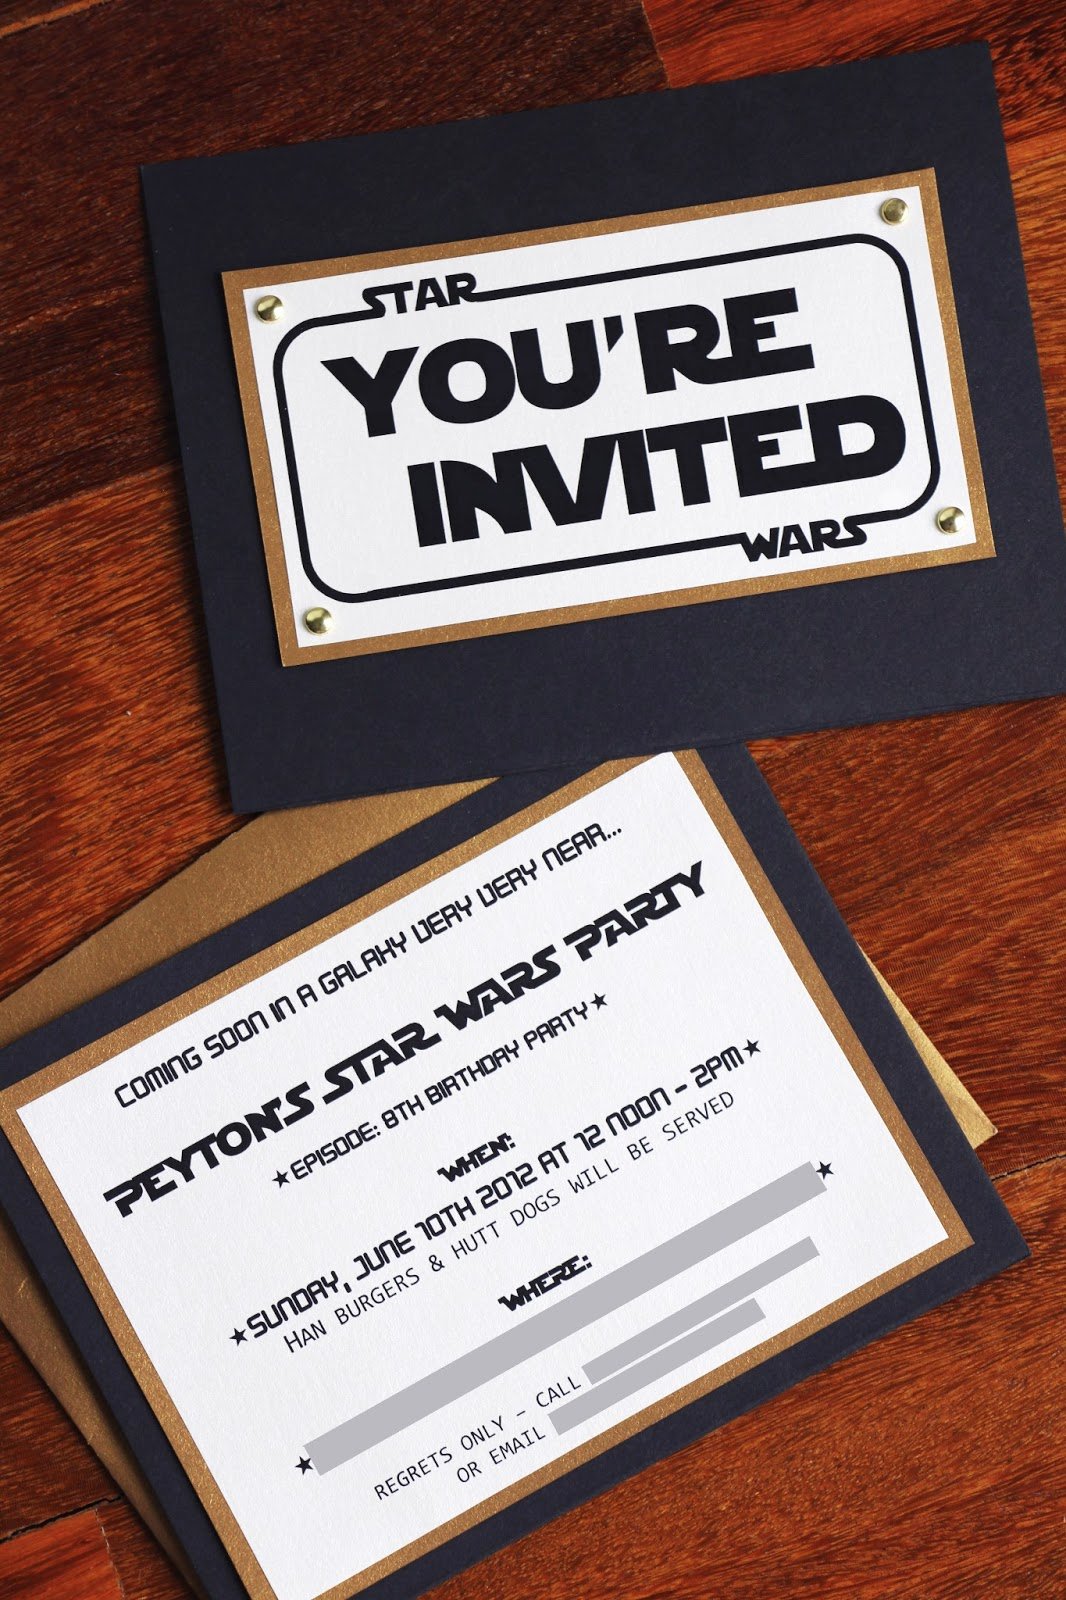 Star Wars Party Invitations Beautiful the Contemplative Creative Star Wars Party Invitation